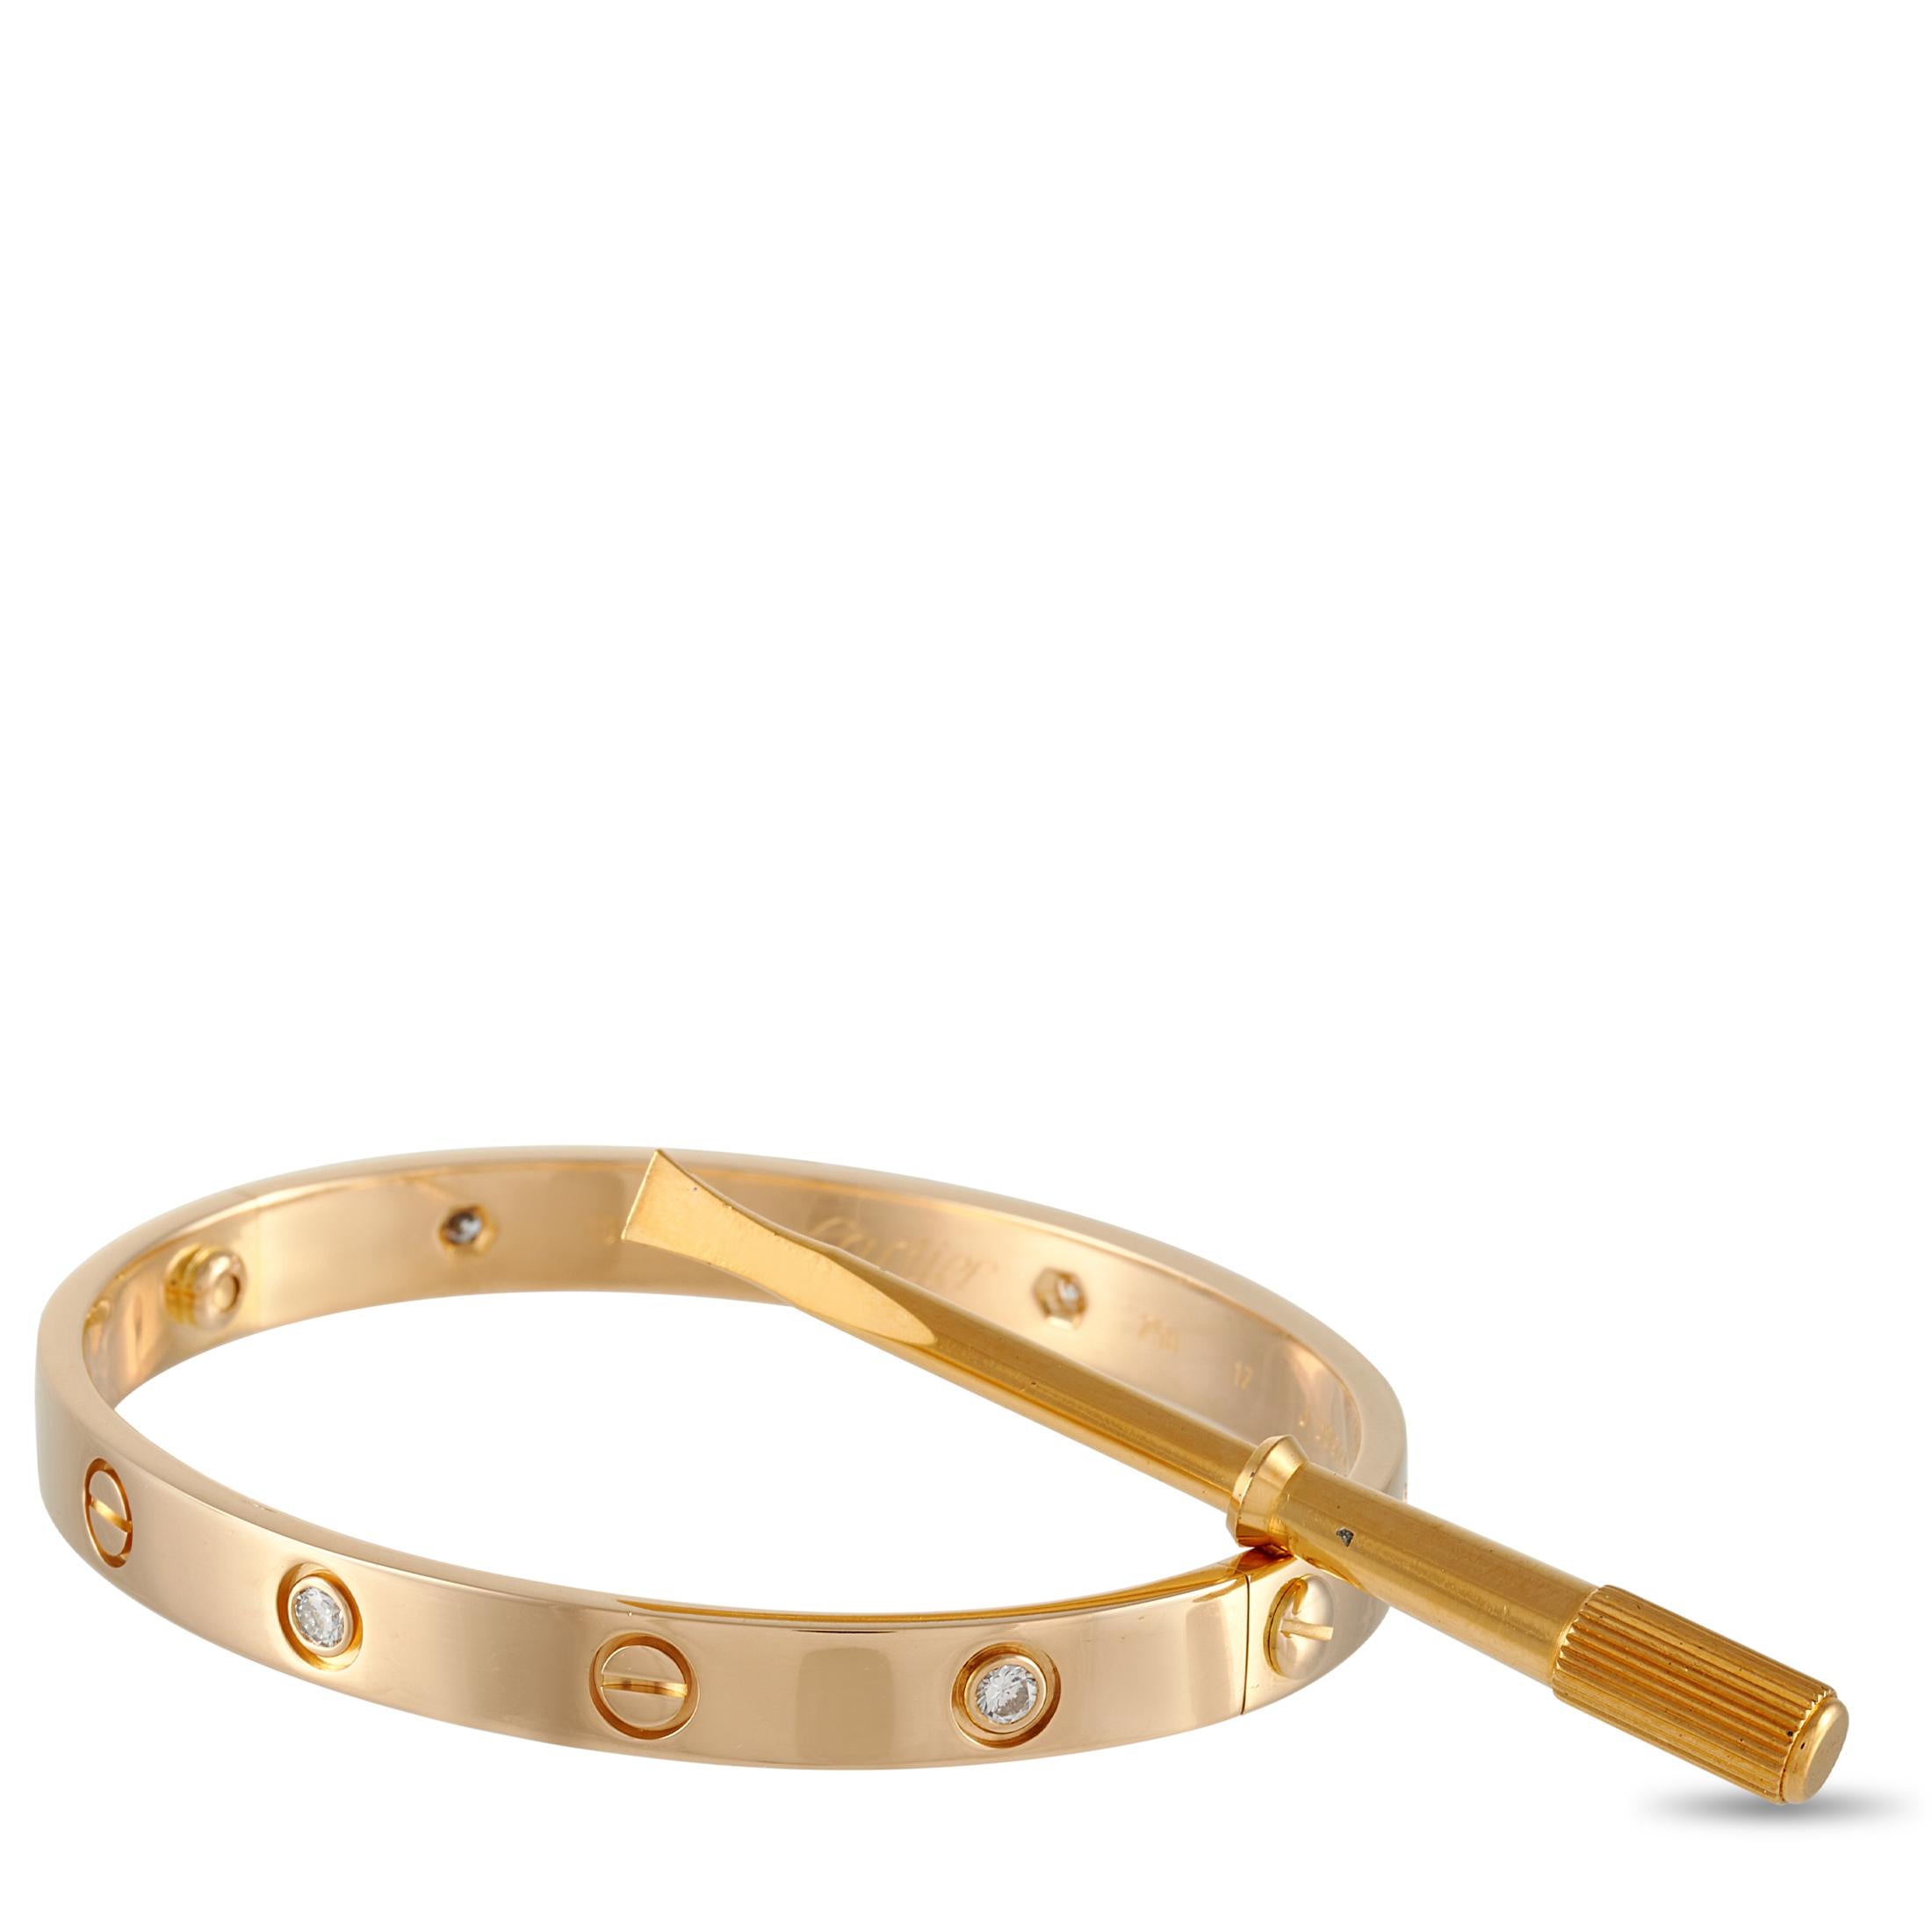 This iconic Cartier LOVE bracelet is a statement-making piece that is perfect for adding upscale style to your everyday. Made from glistening 18K Rose Gold, 6 round-cut inset diamonds add extra elegance to this already charming design. It measures